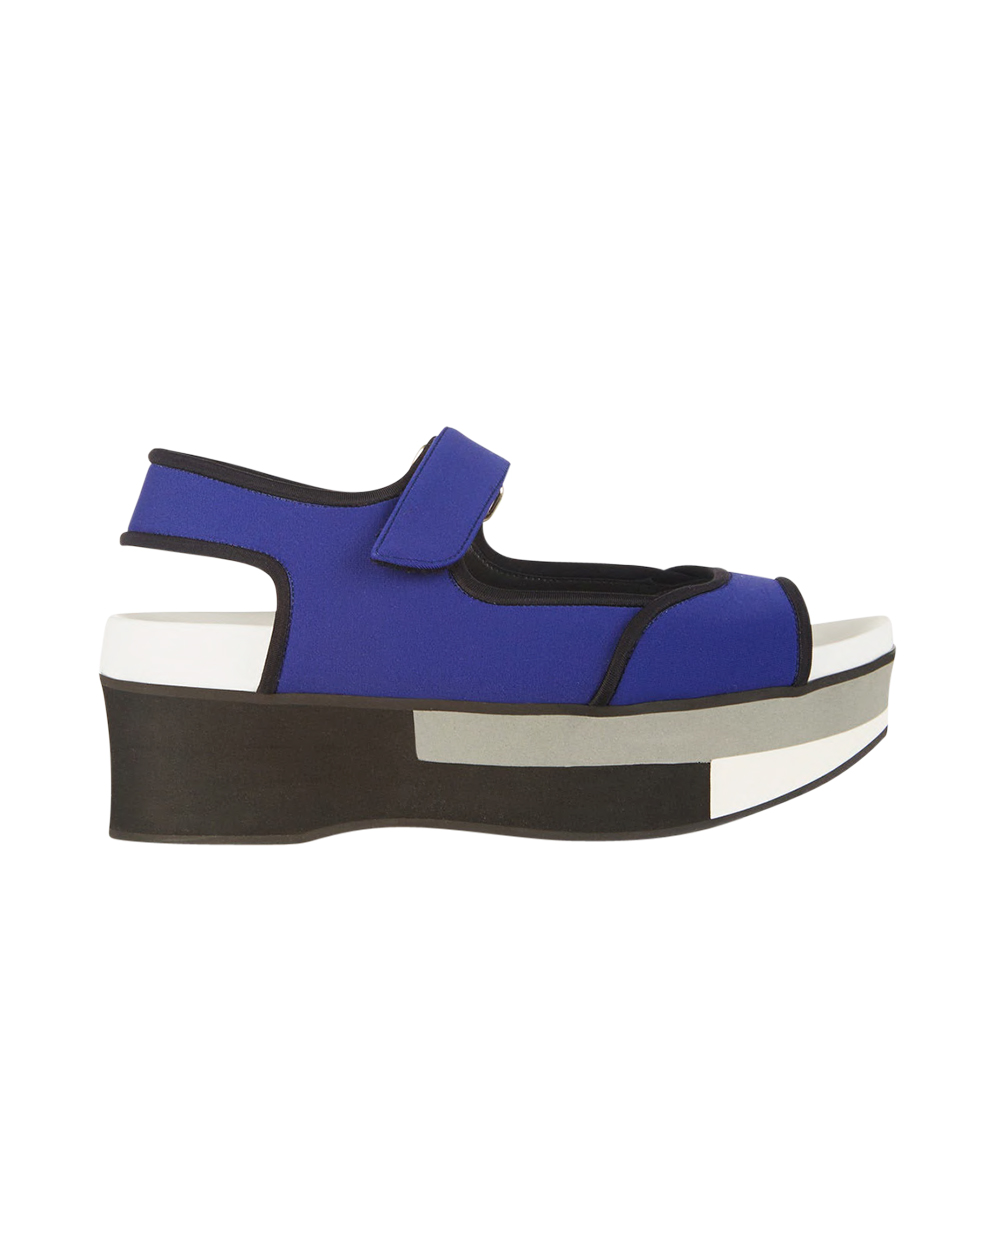 Marni shoes, $1235, from Net-a-Porter